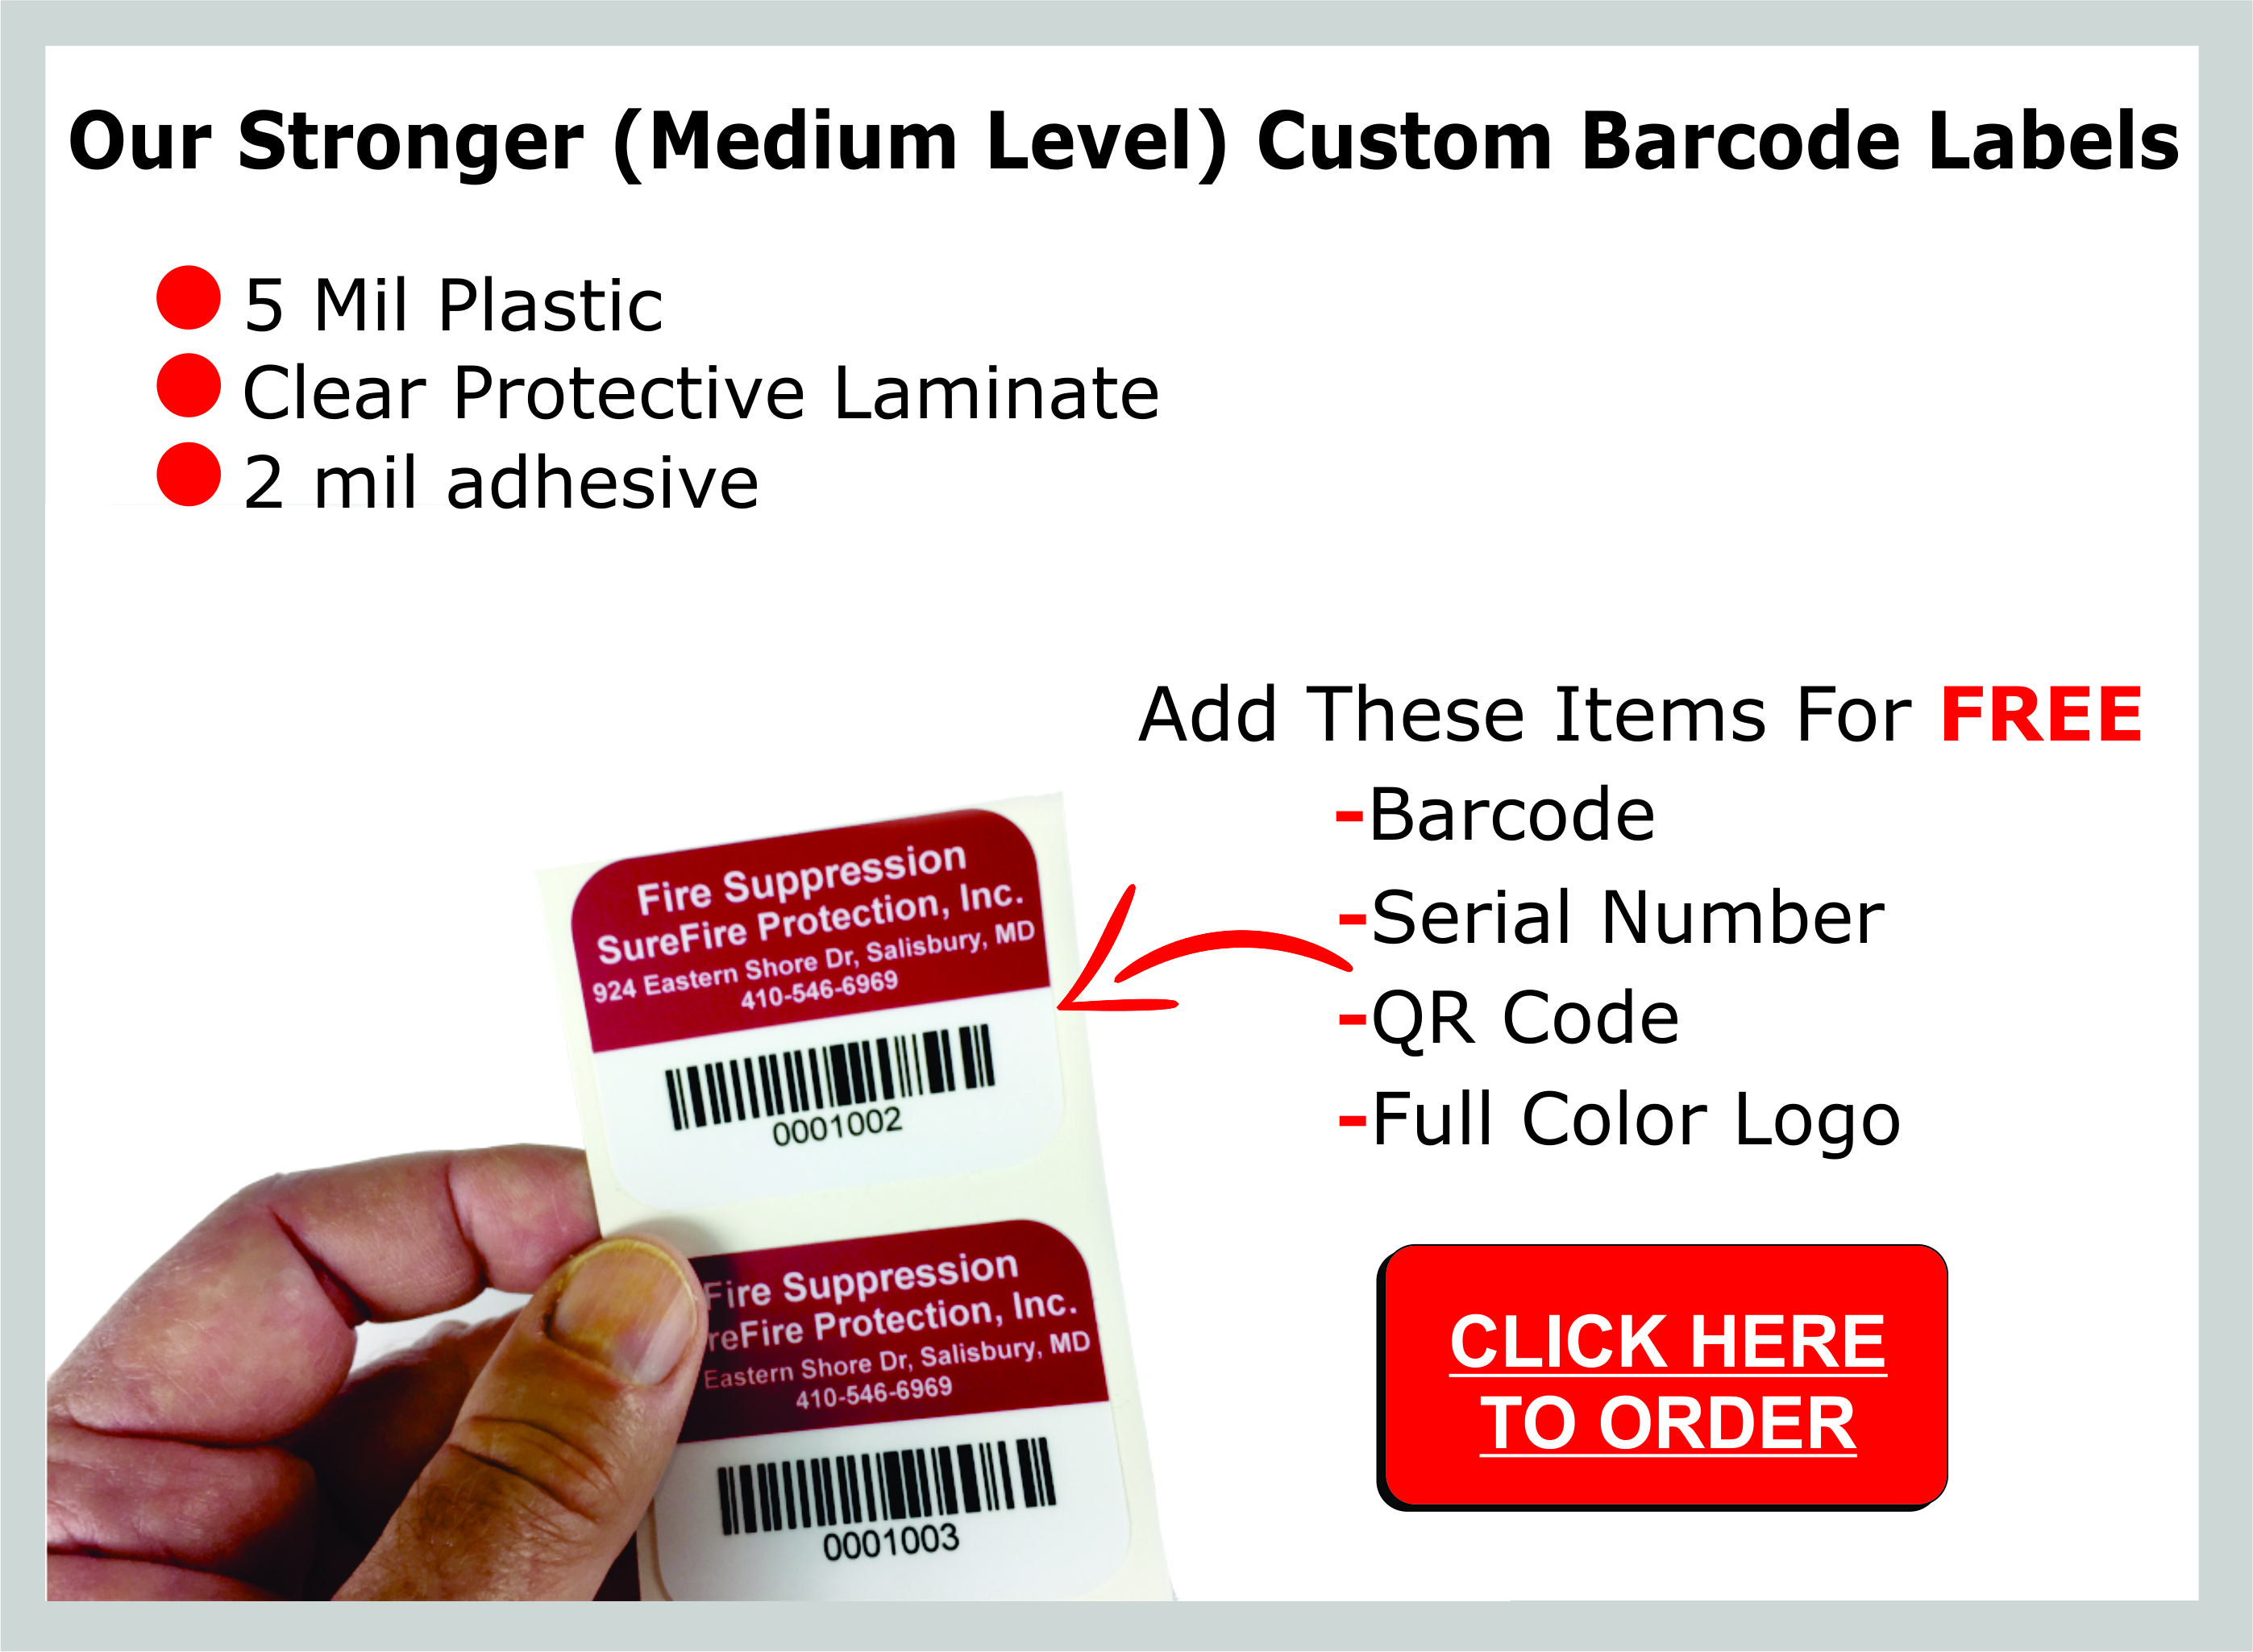 Custom Barcode Labels 3m Adhesive Strong Asset Tags 8112